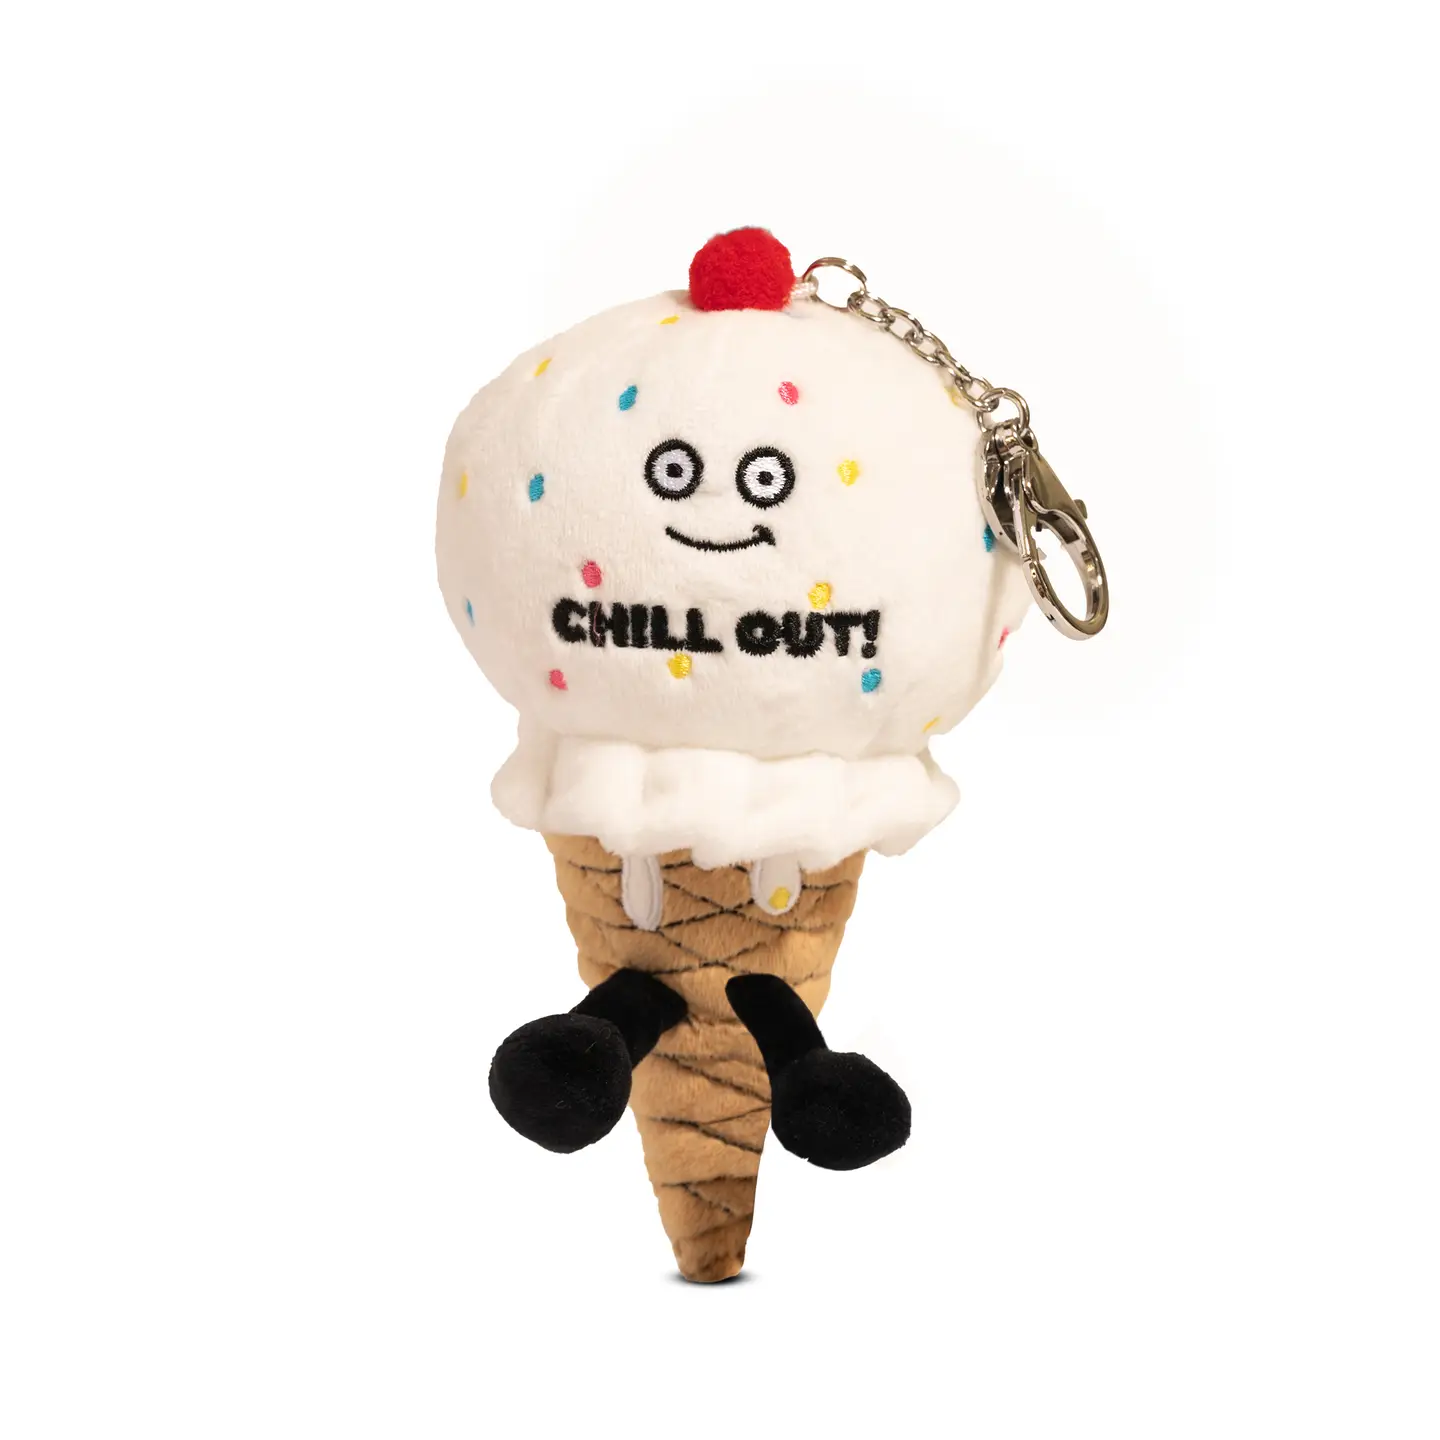 Here’s the scoop: This bag charm is too cute to ignore. Don’t get it twisted, though. He’s a cool dude who needs everyone to just chill out. With this bite-sized plush, it’s all about the toppings. His 3D cherry, colorful sprinkles, and cone body make him extra sweet. He’d make the perfect accessory for any bag, backpack, or purse.